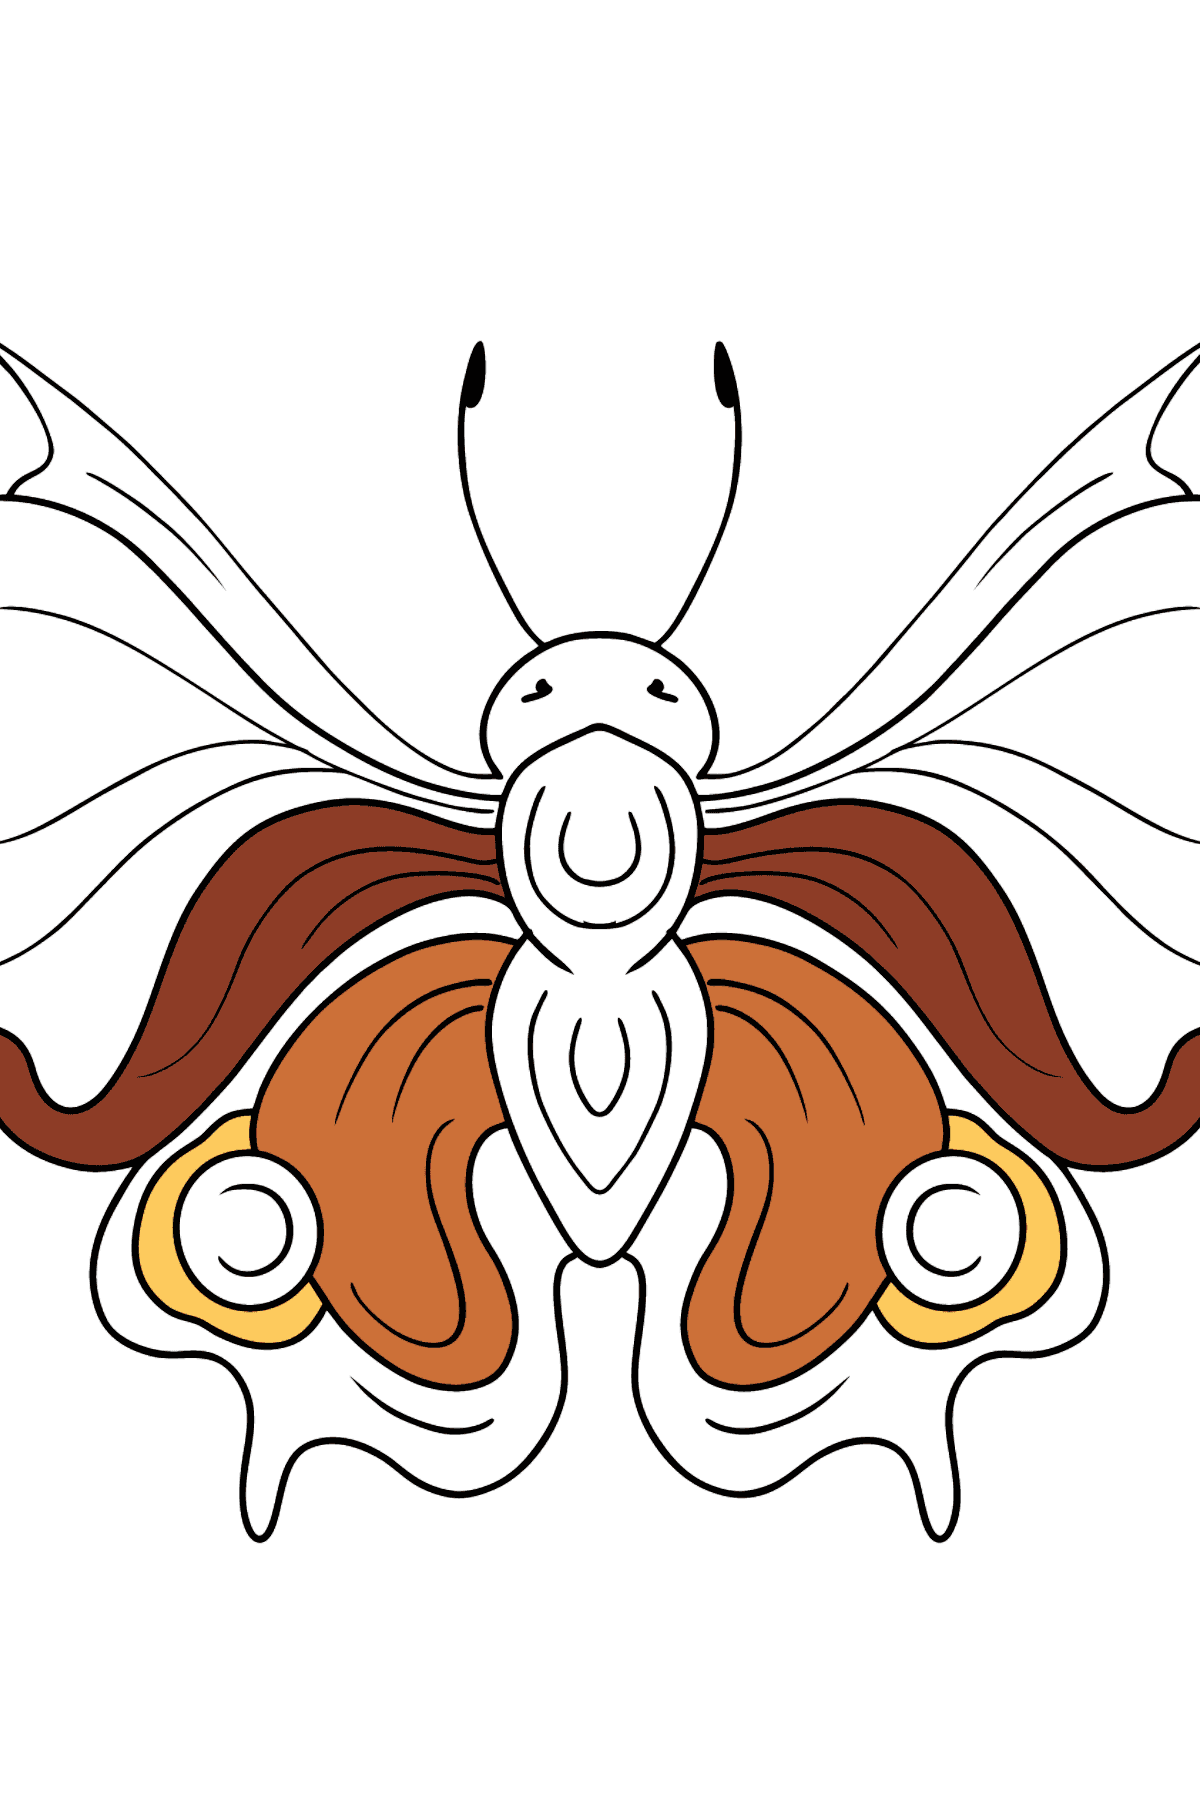 Peacock Butterfly coloring page - Coloring Pages for Kids